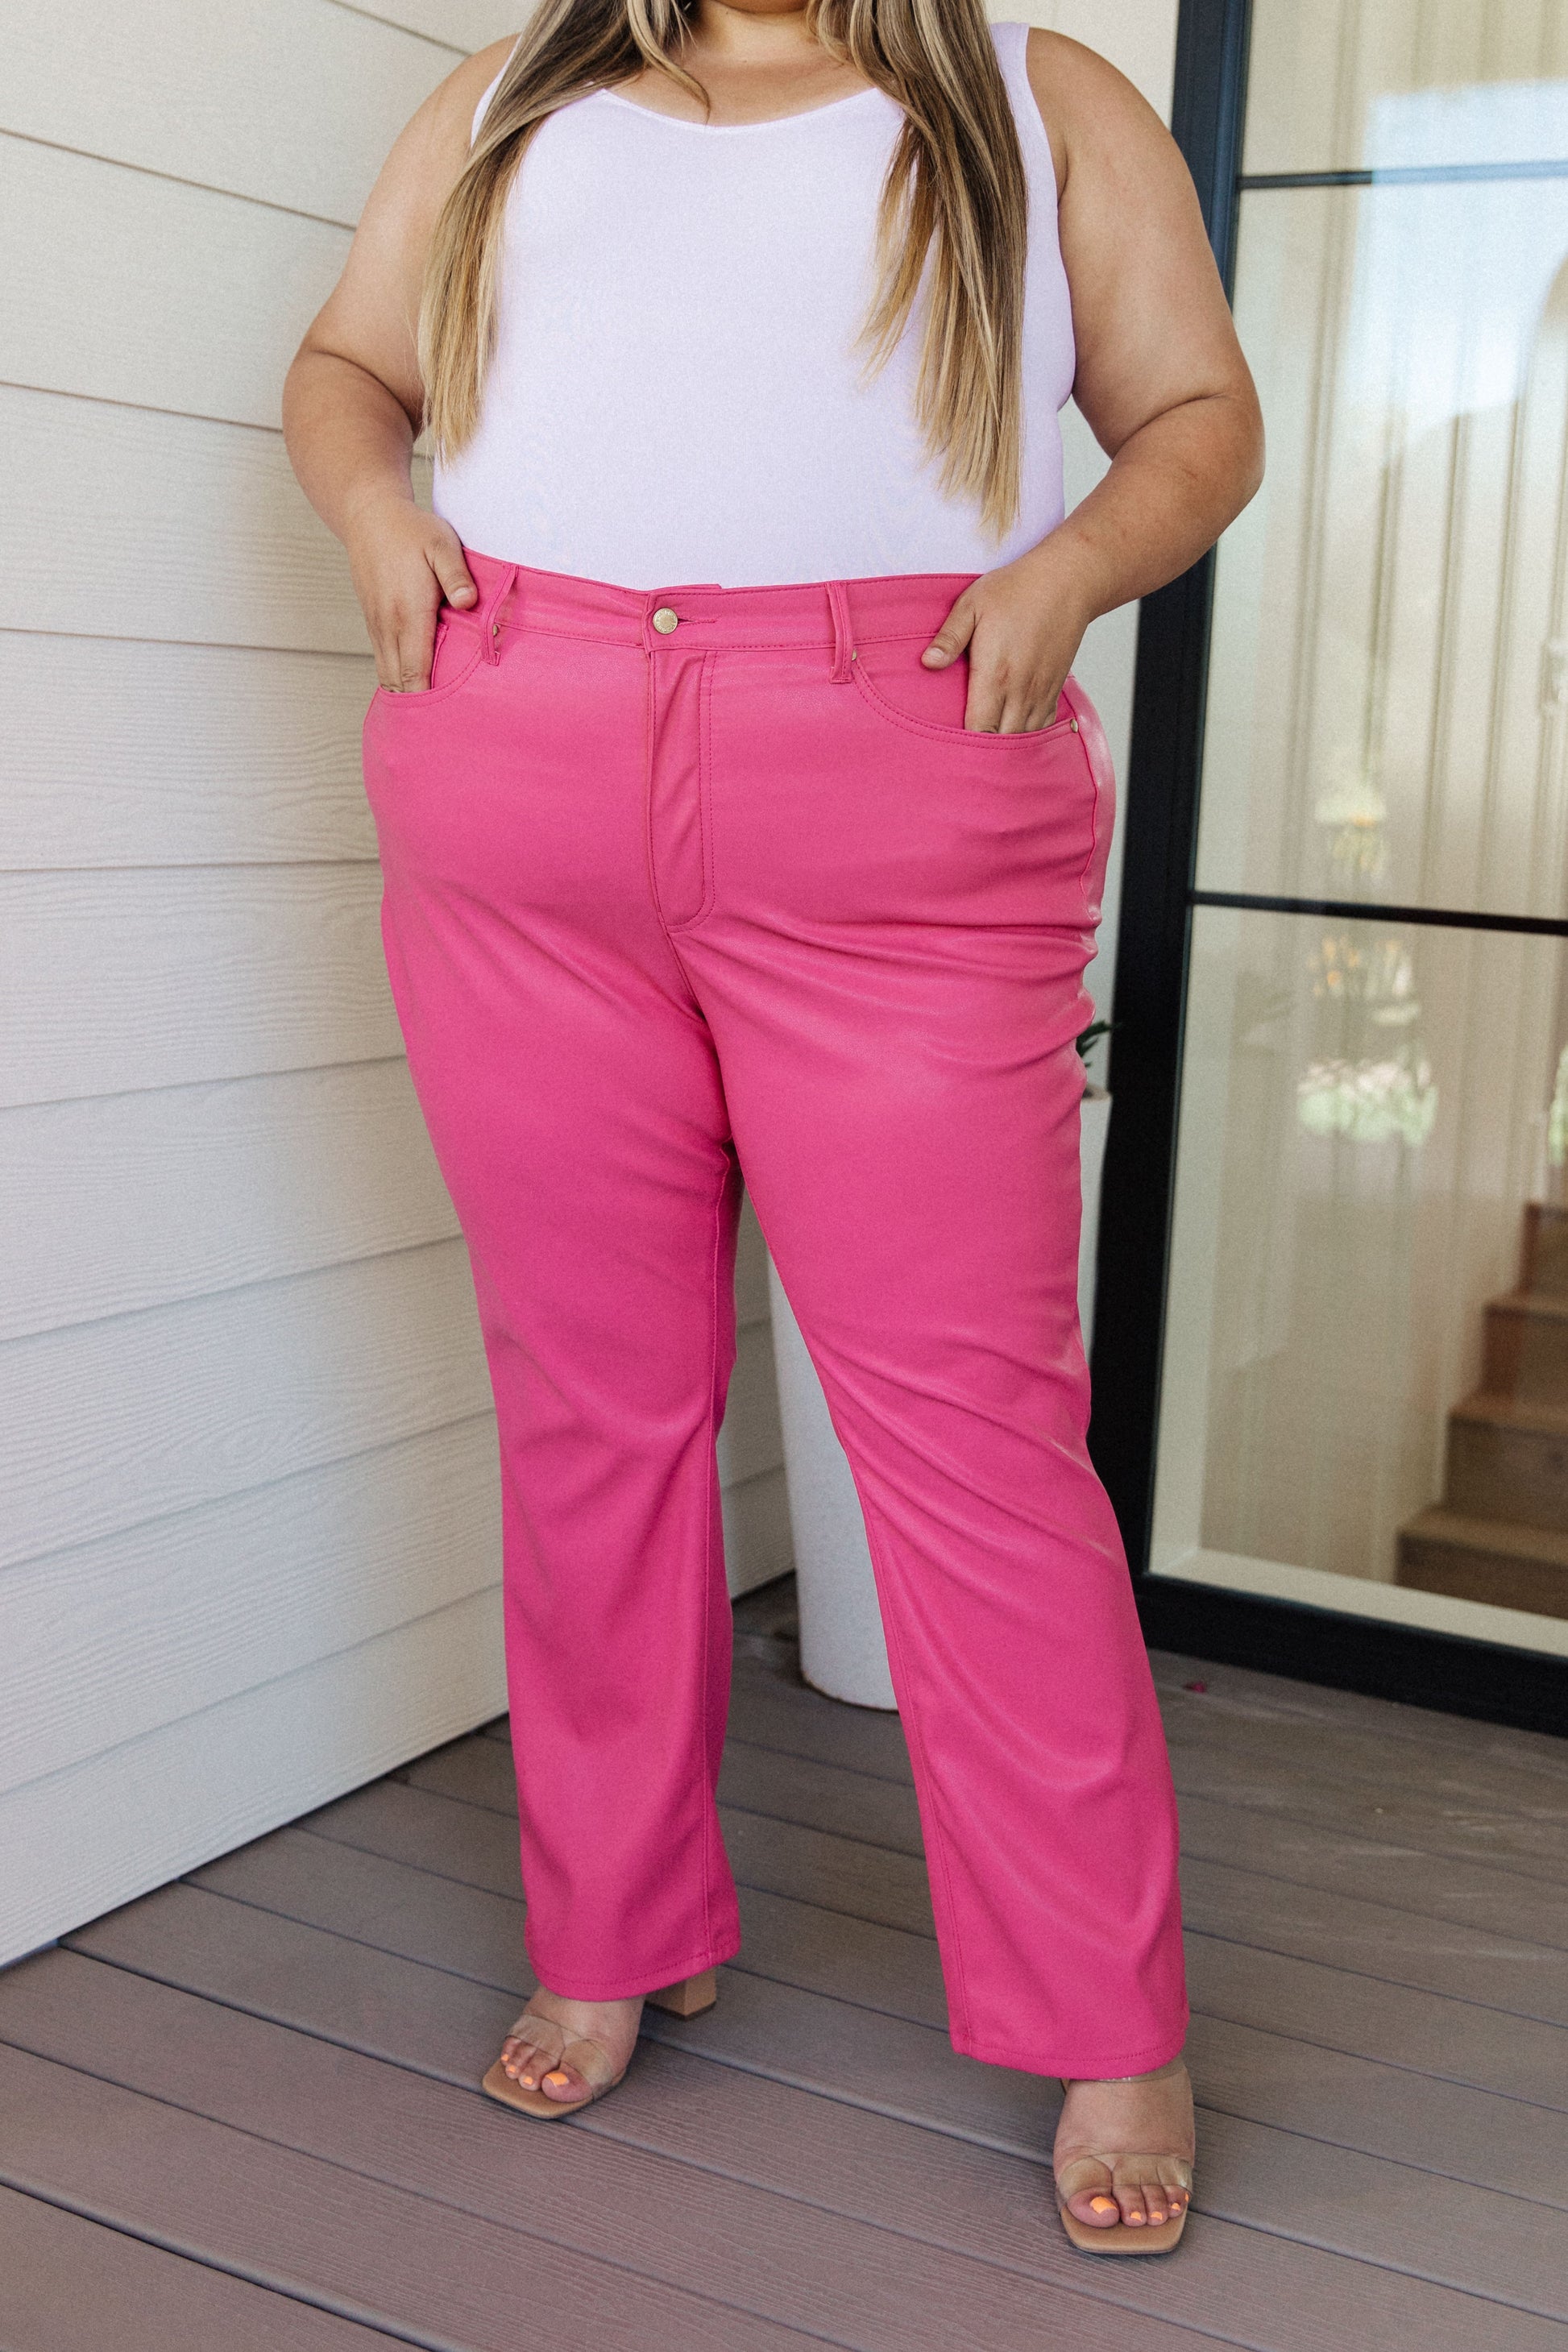 Tanya Control Top Faux Leather Pants in Hot Pink – End Of Watch Heroes